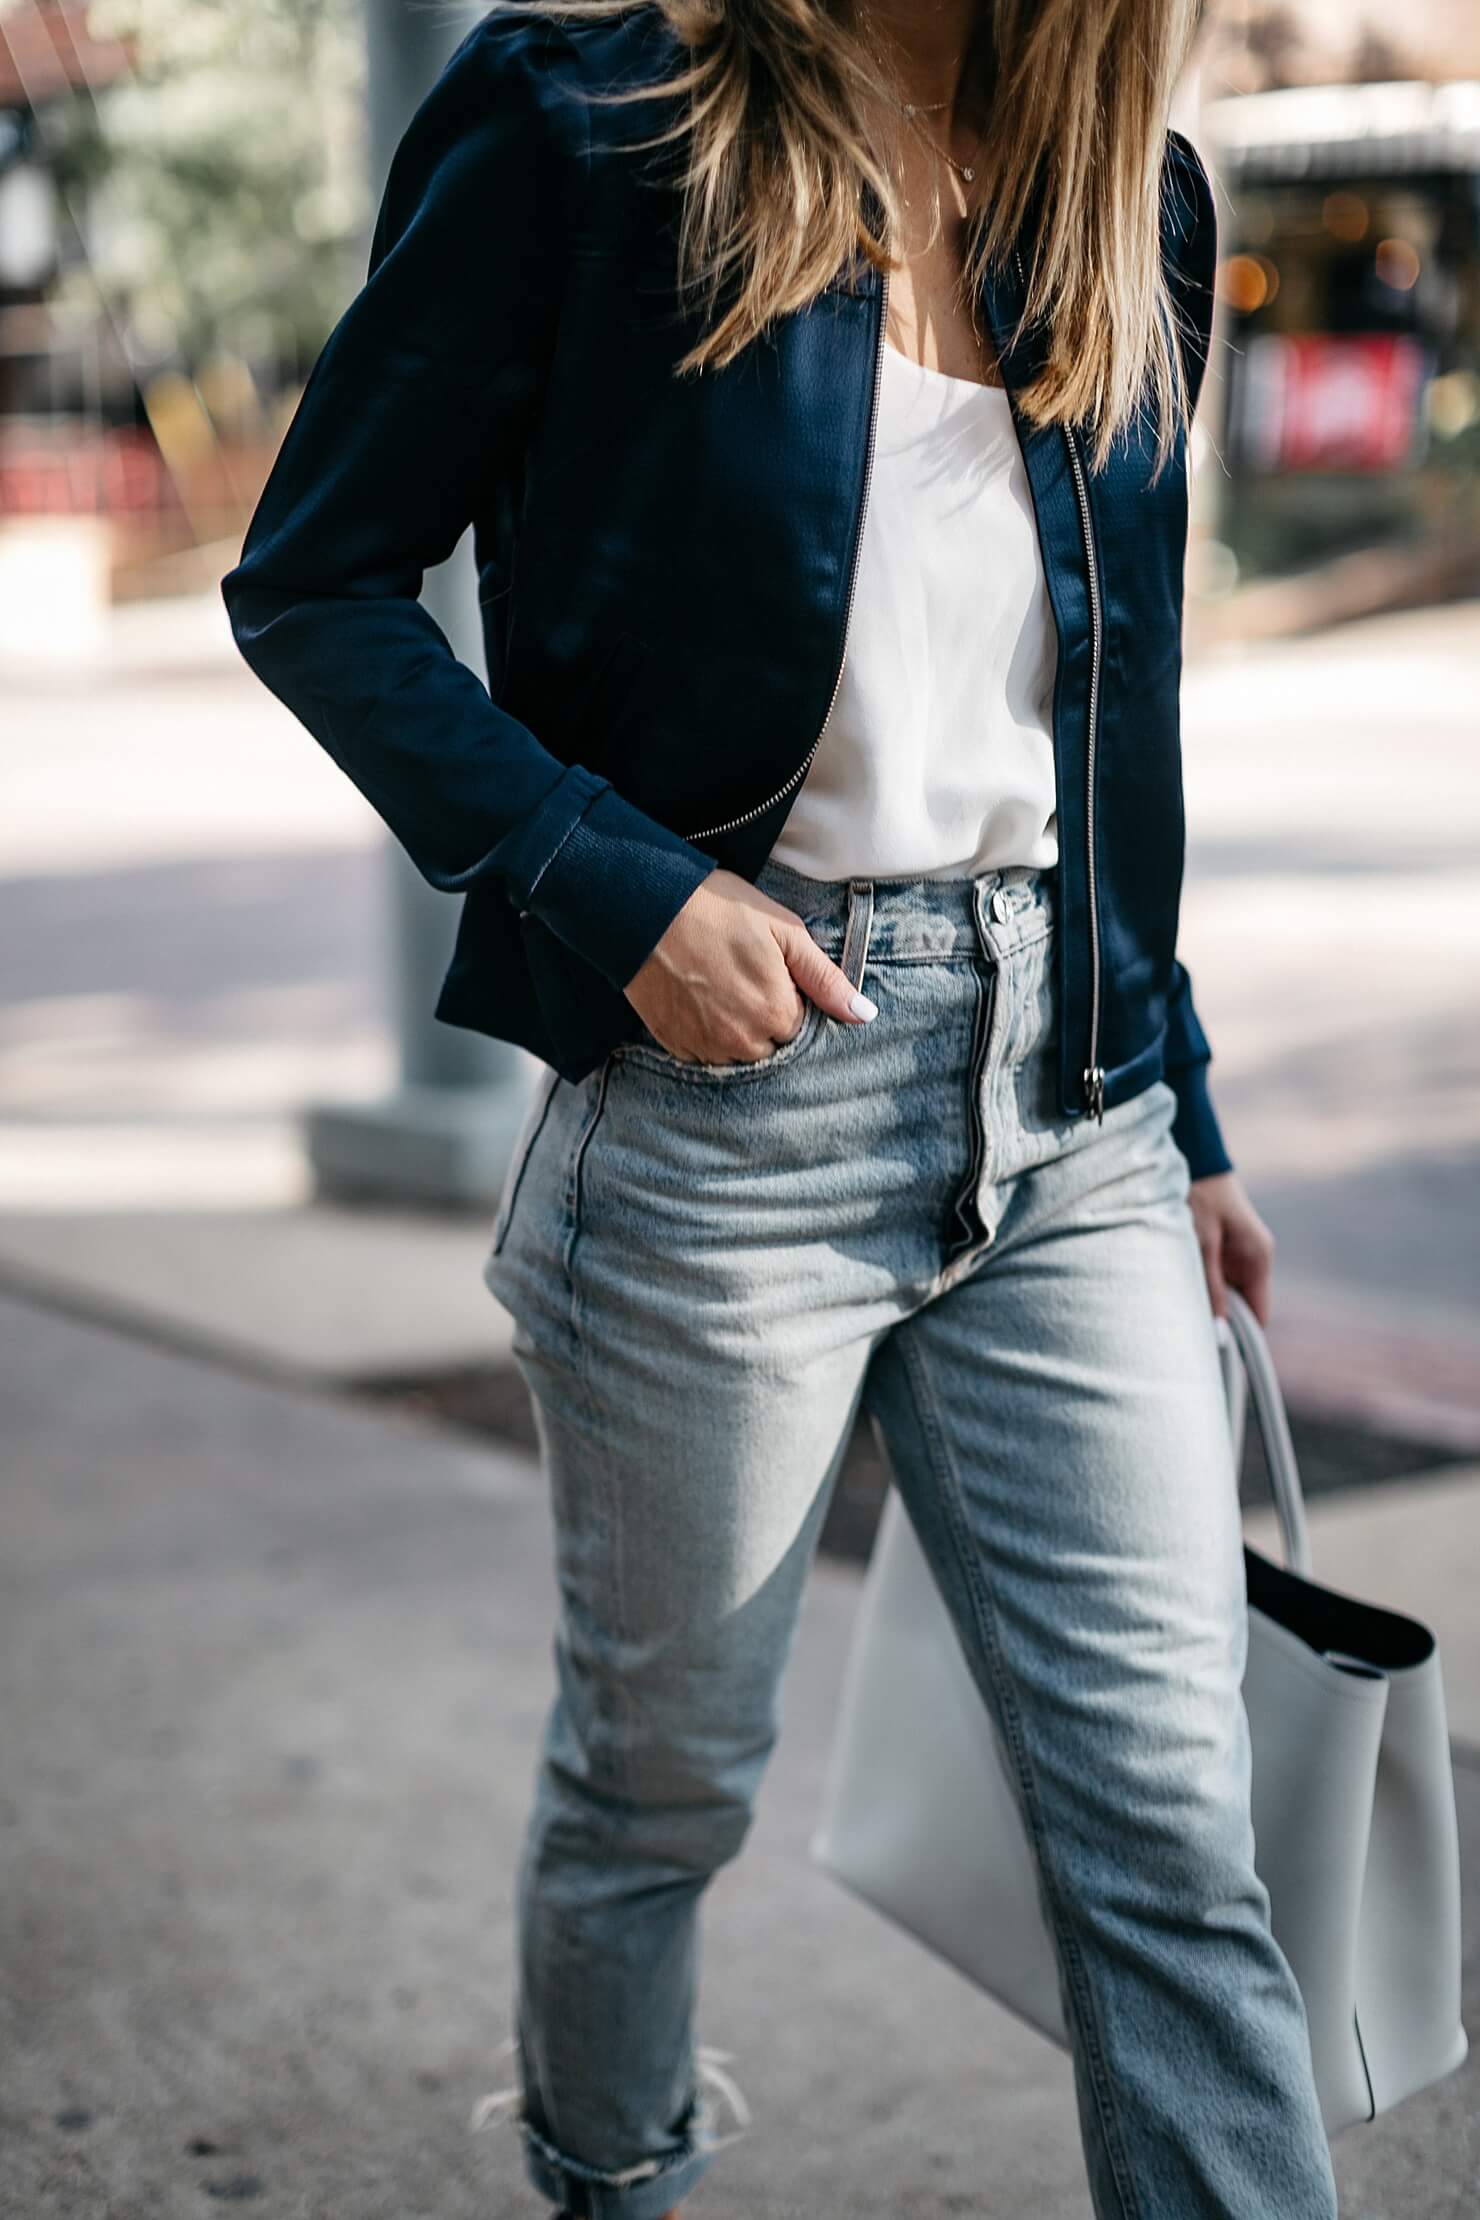 satin bomber, white t-shirt, light jeans, and low blue heel 